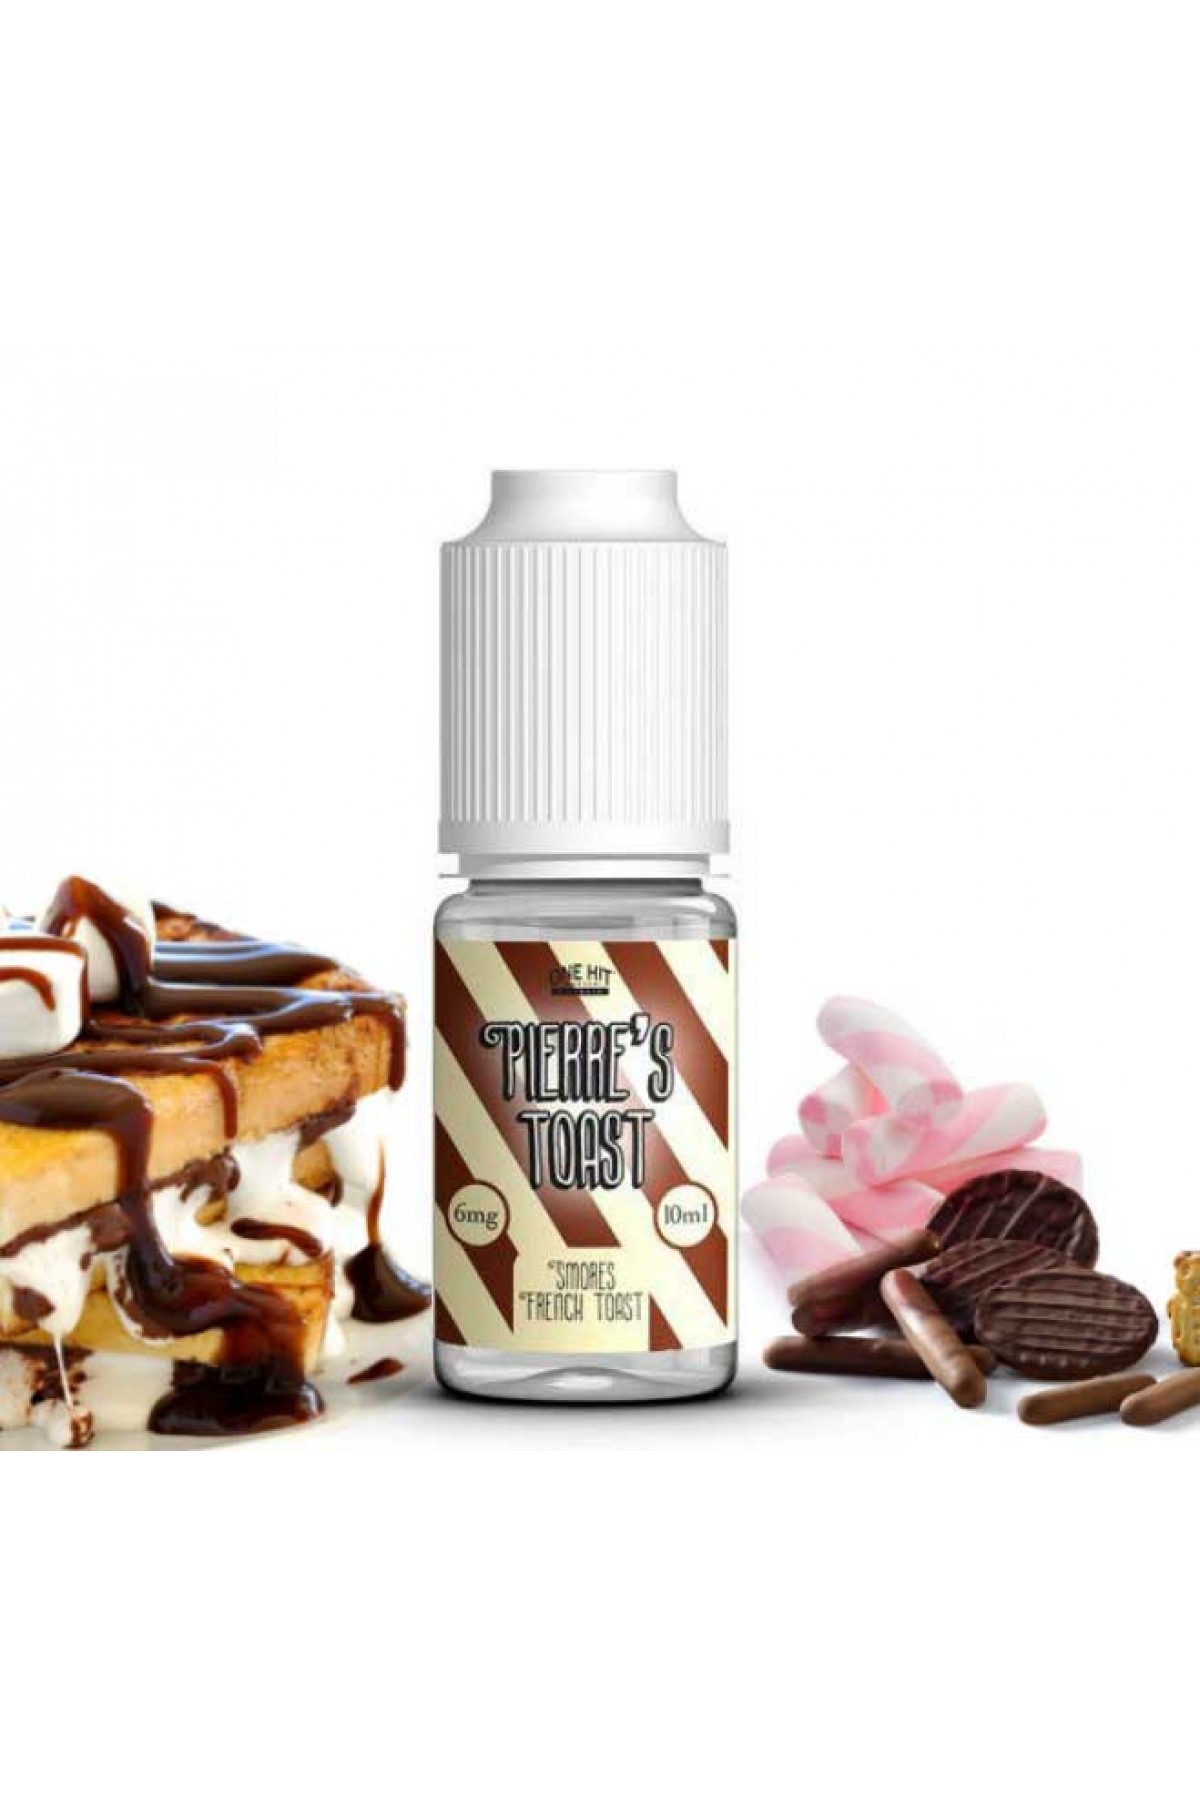 One Hit Wonder Pierre S Toast French Toast Smores 10ML